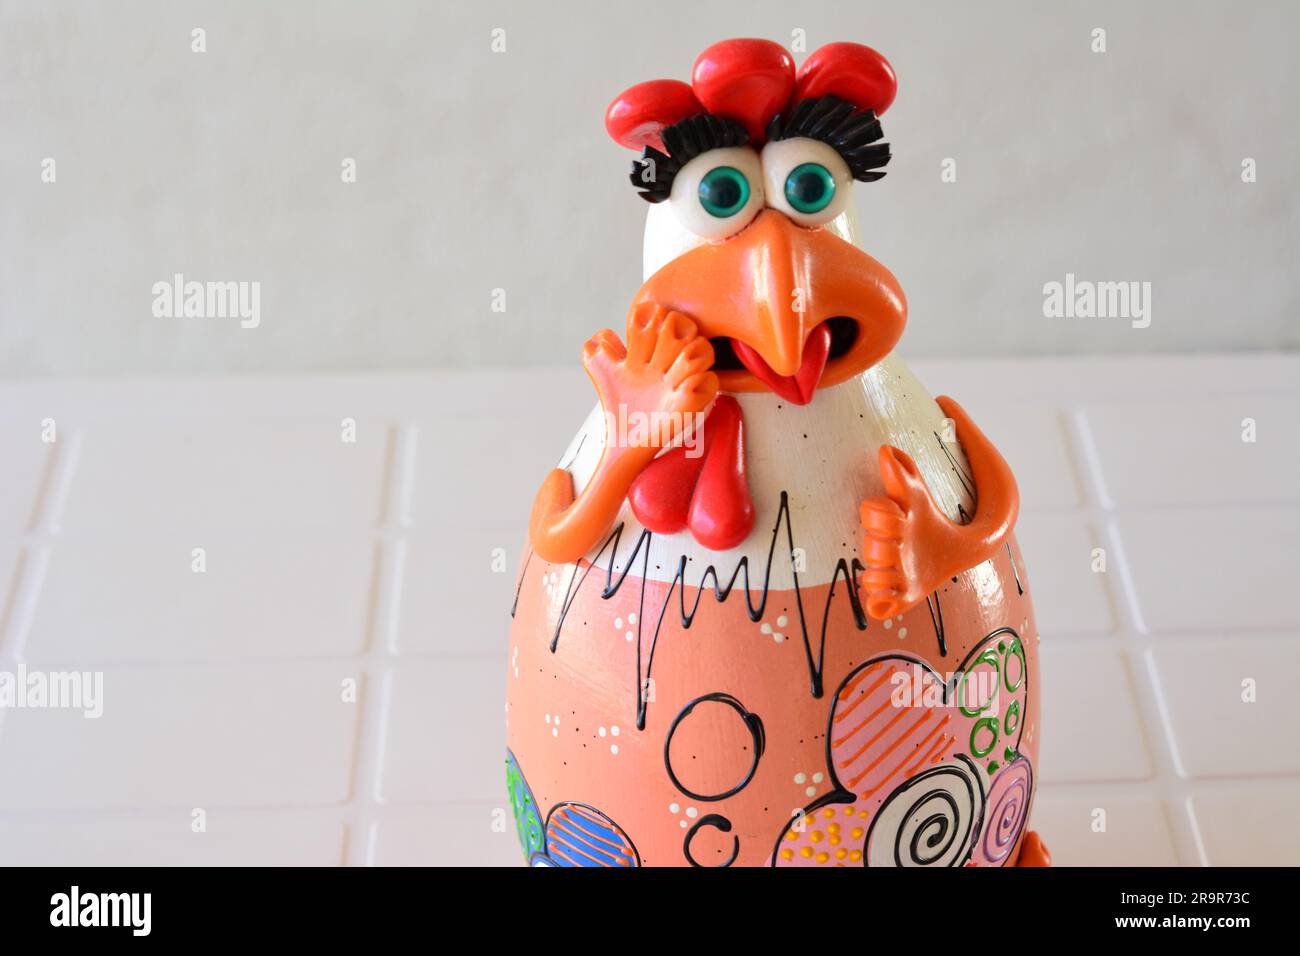 City: Marilia, São Paulo, Brazil - 07 April 2022: Craftsmanship. Ginger chicken on display of crafts made in Brazil, South America, zoom style photo, Stock Photo